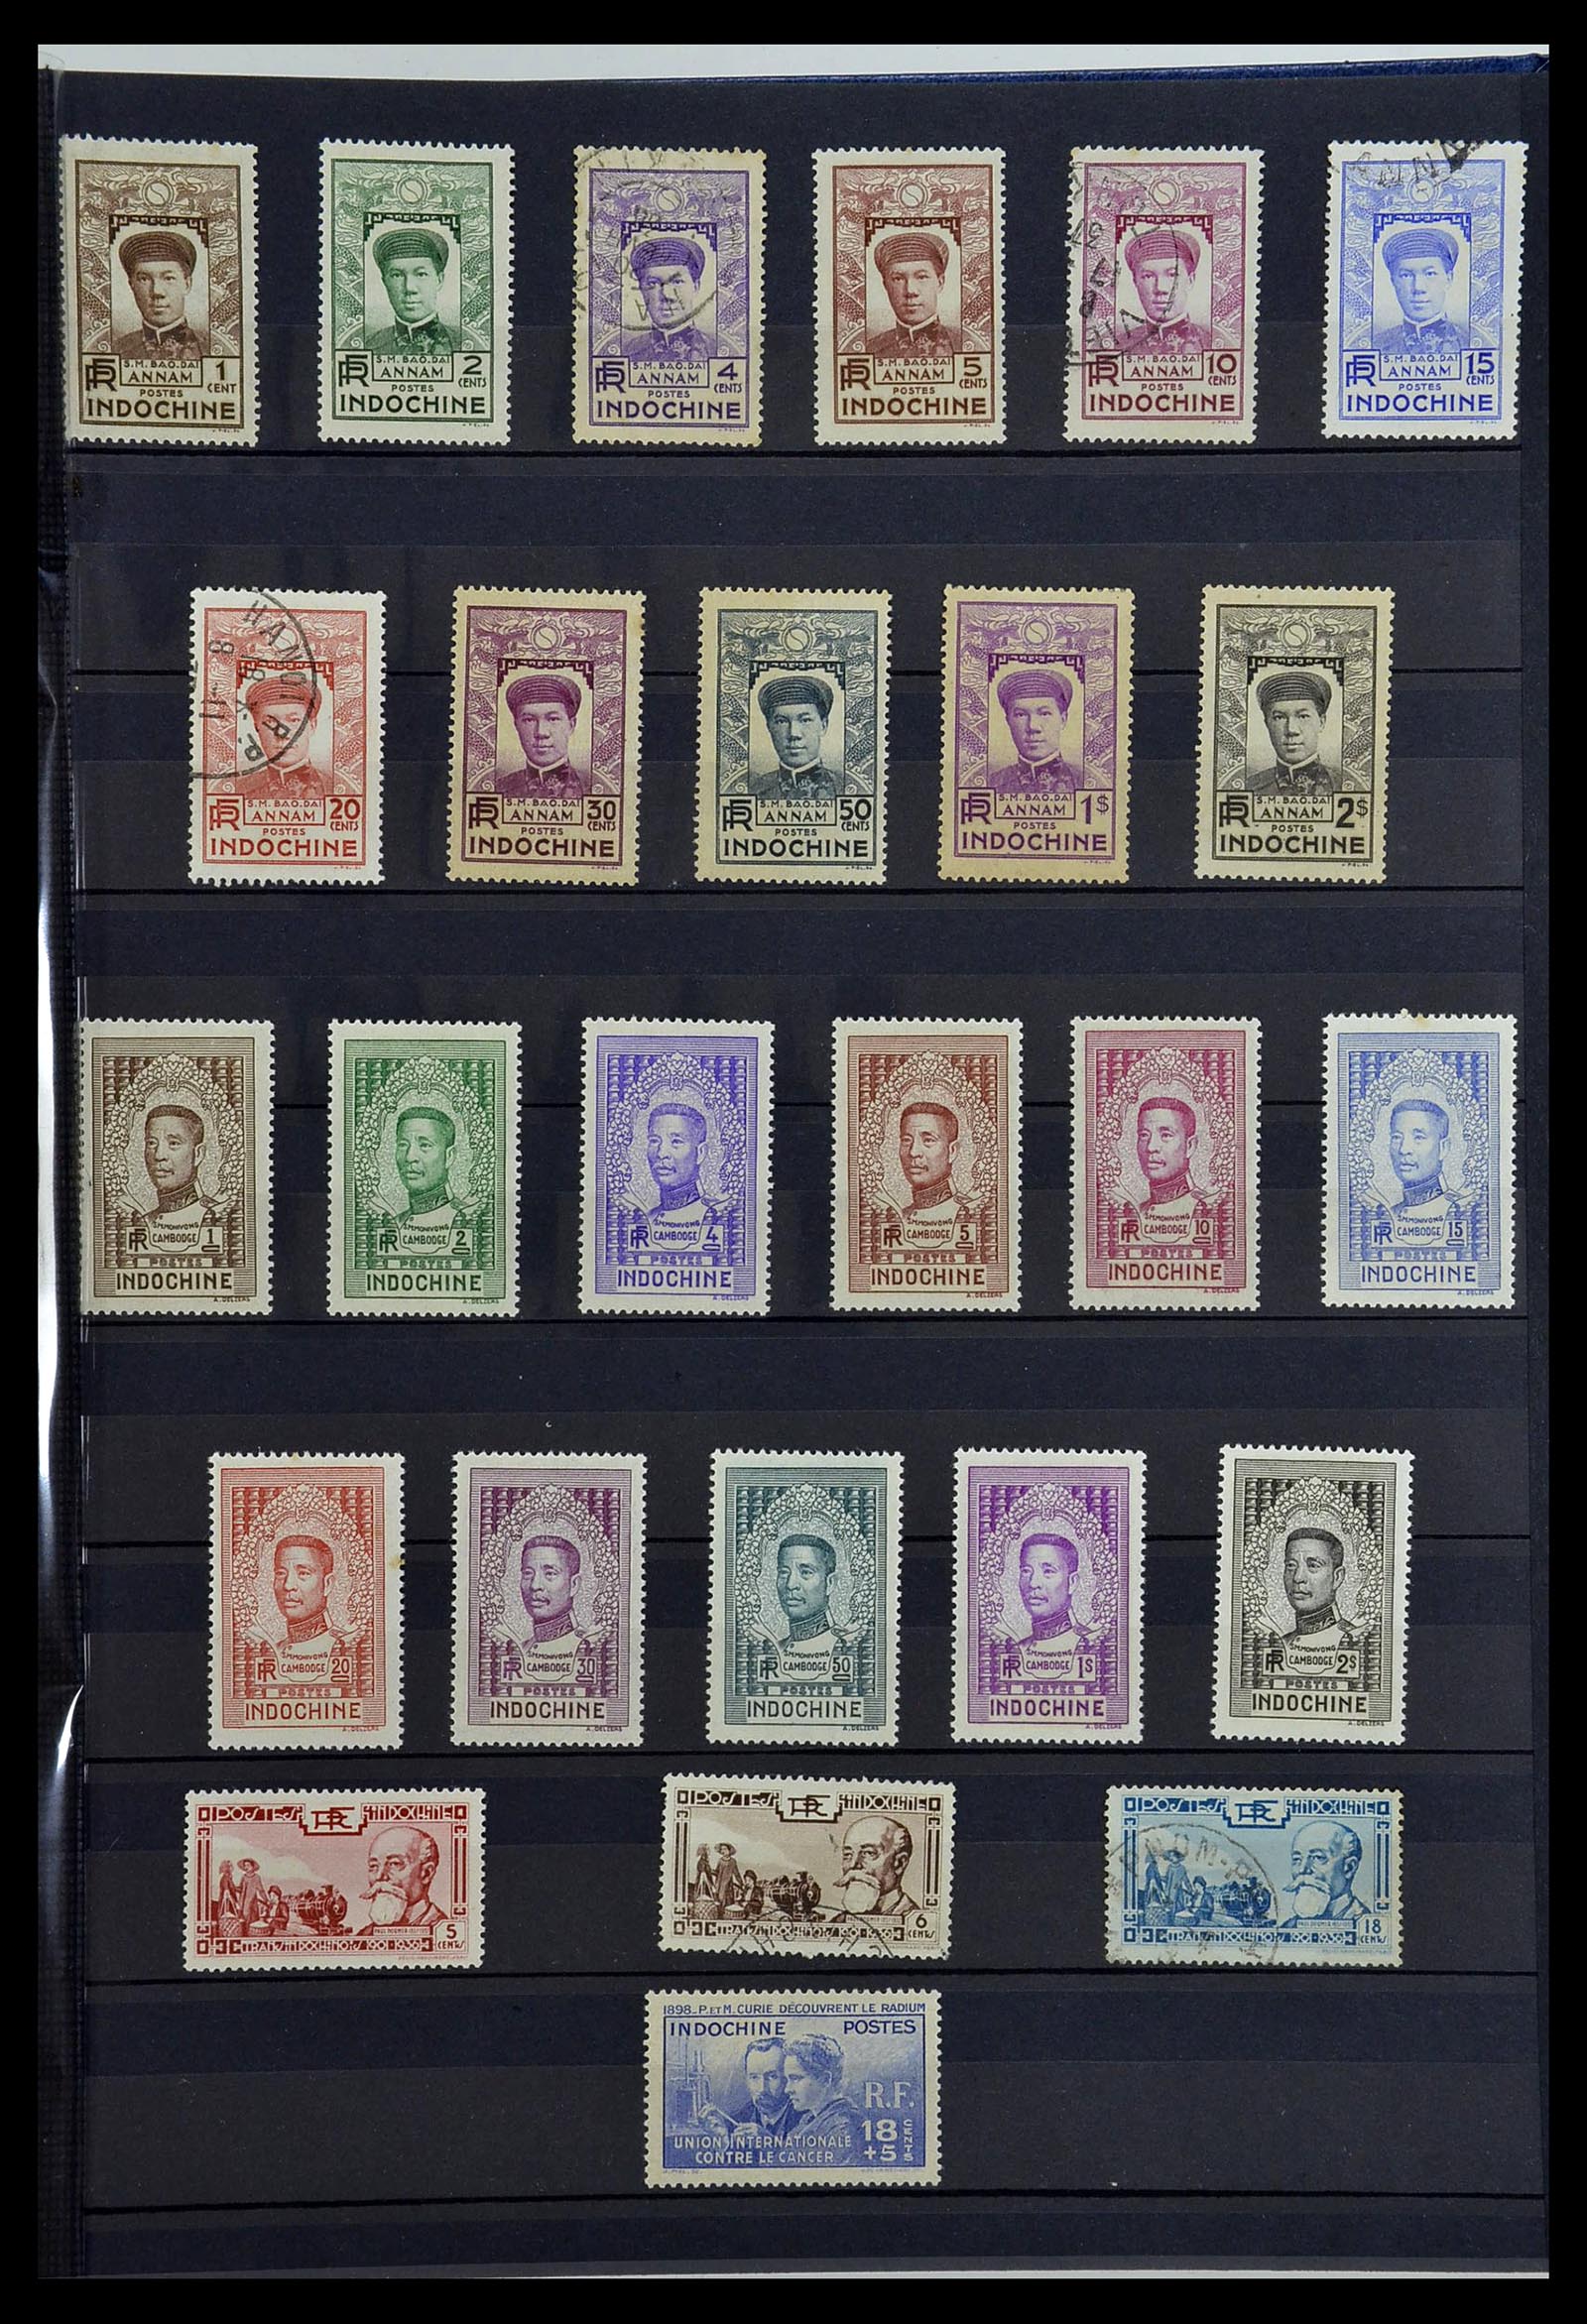 34218 007 - Stamp collection 34218 Indochine 1889-1945.